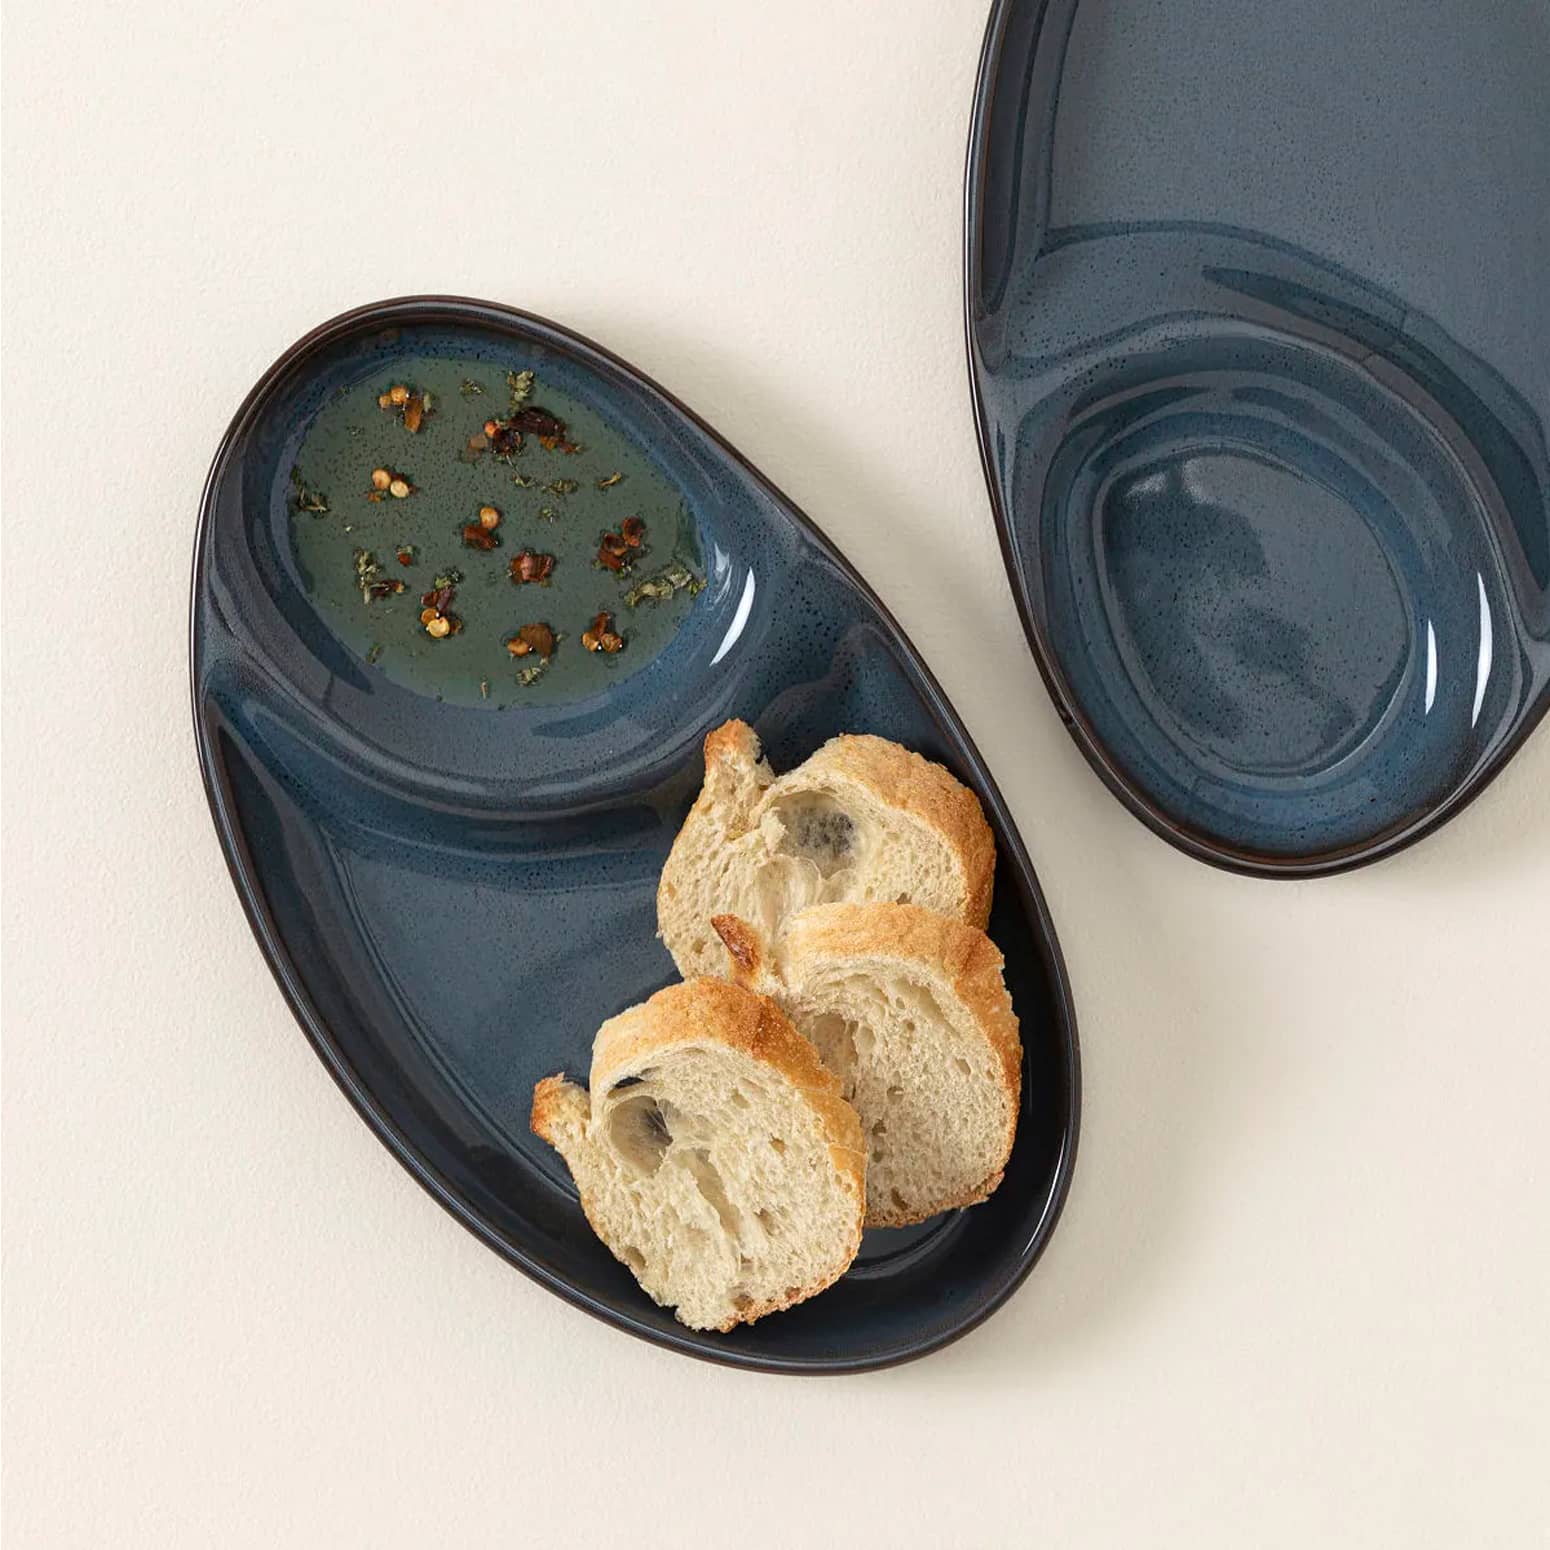 Olive Oil Dipping Plates